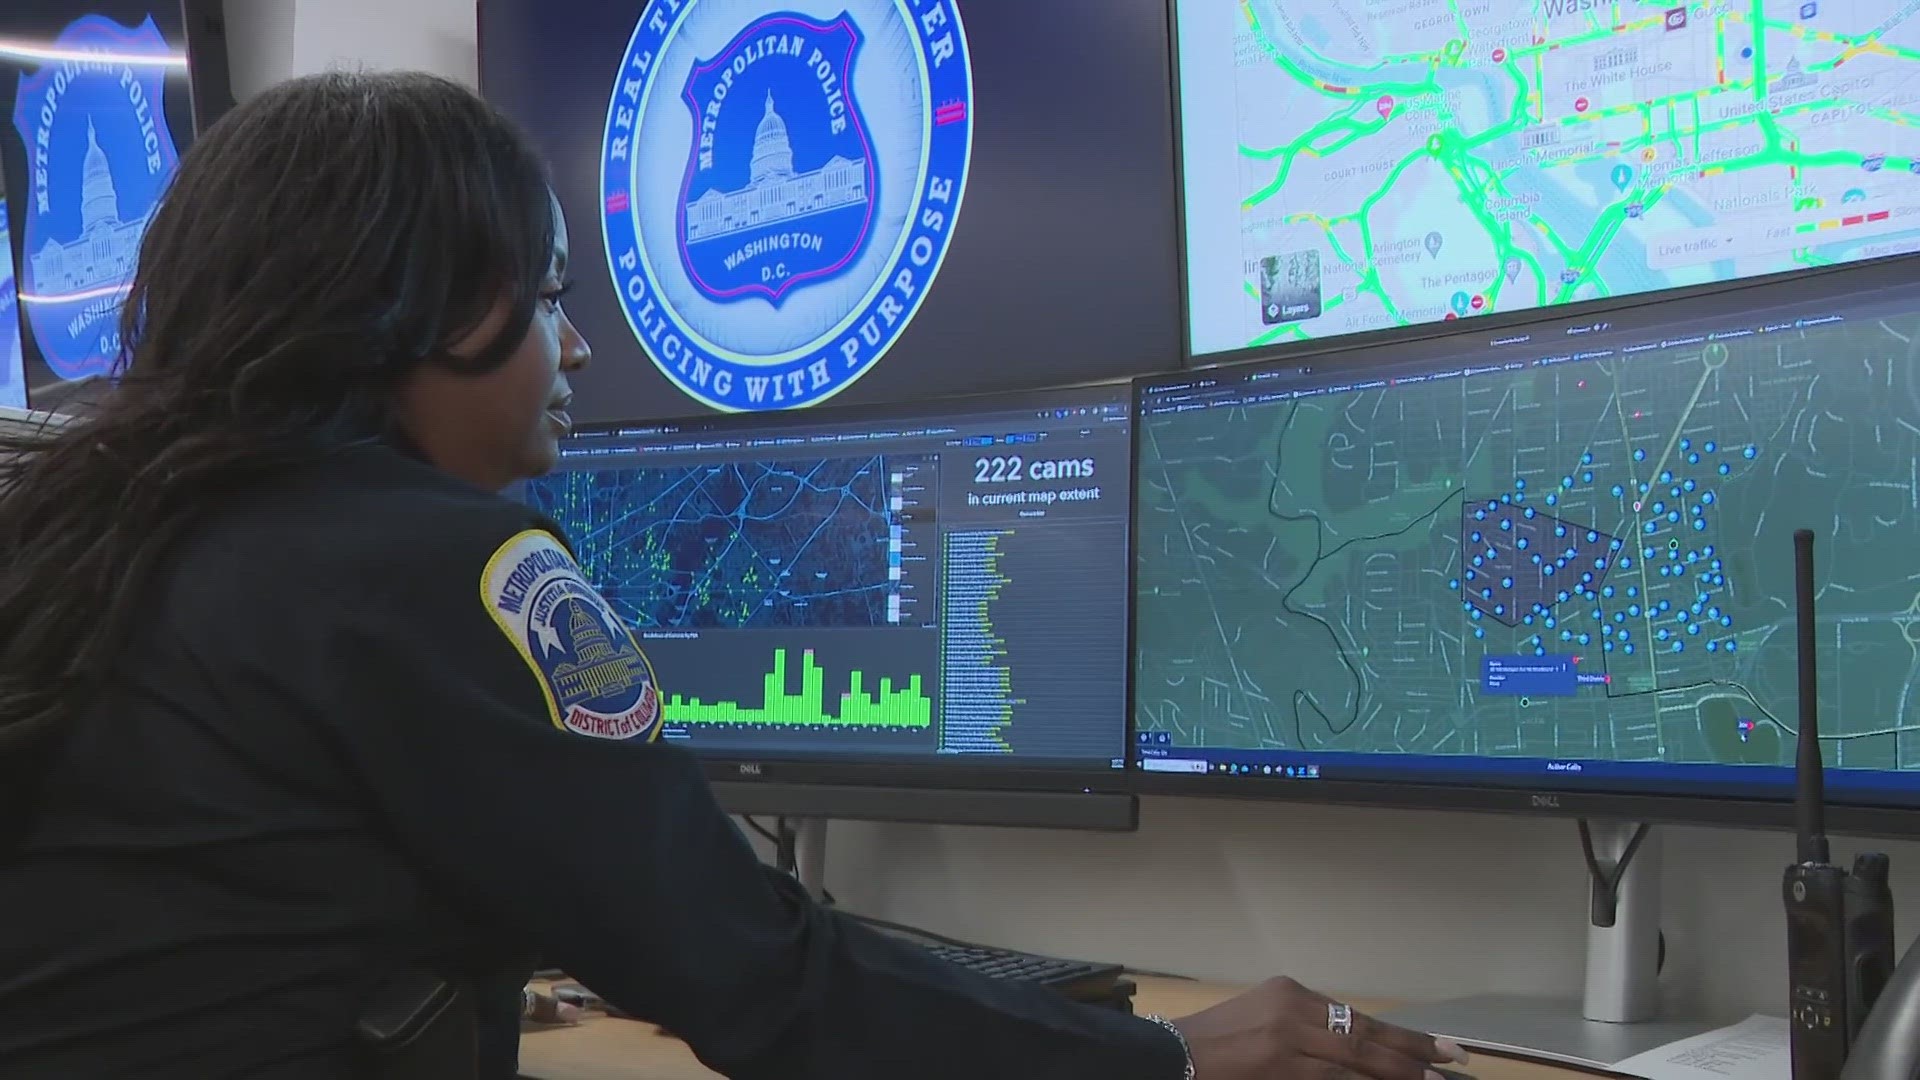 We're getting our first look inside DC's new real time crime center. It's focused on technology that they say will change policing in the region.